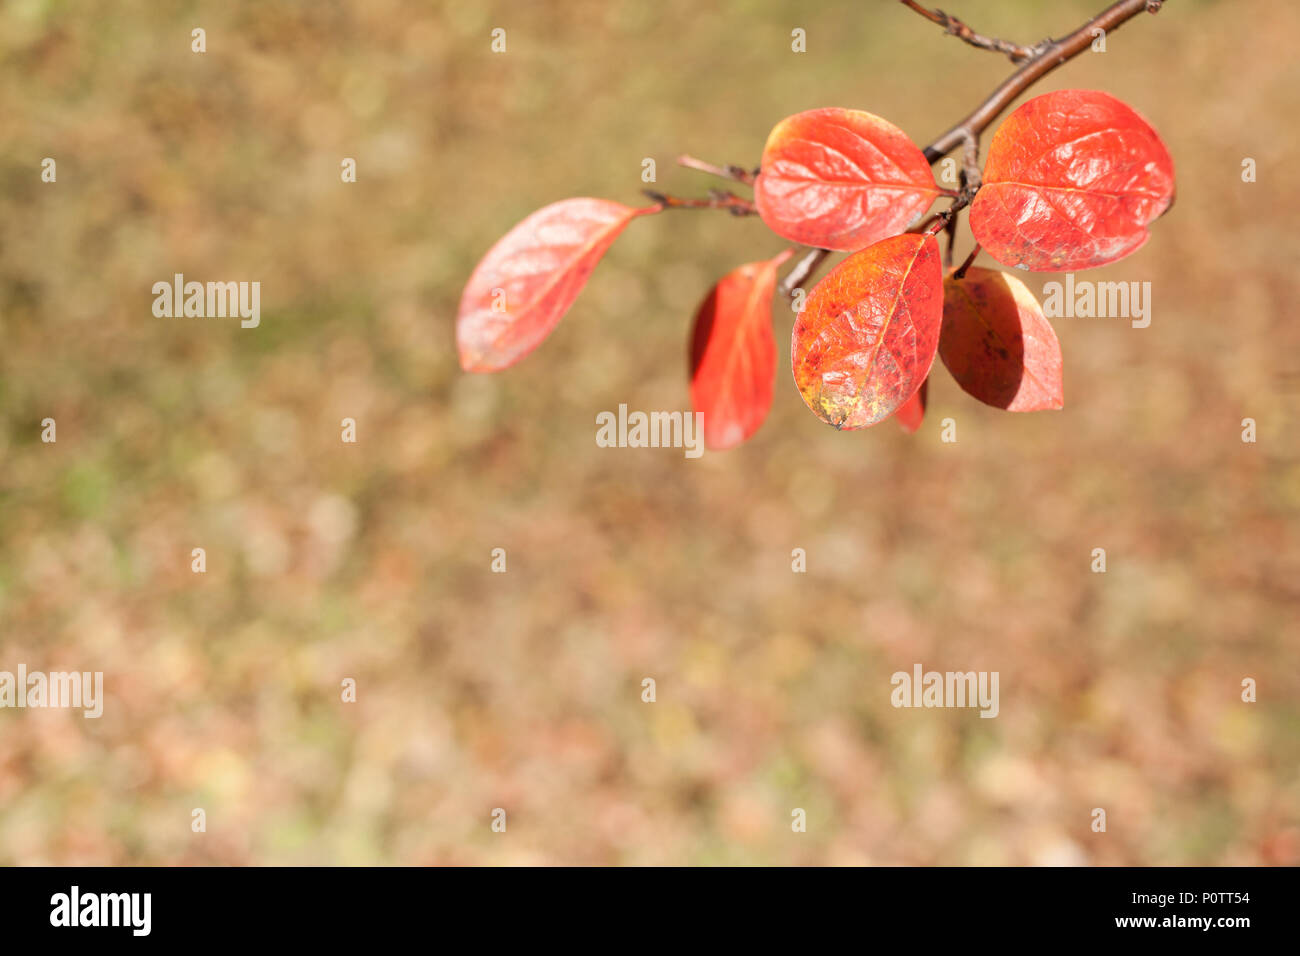 Autumn blurred background with focus on twig with orange leaves. Stock Photo